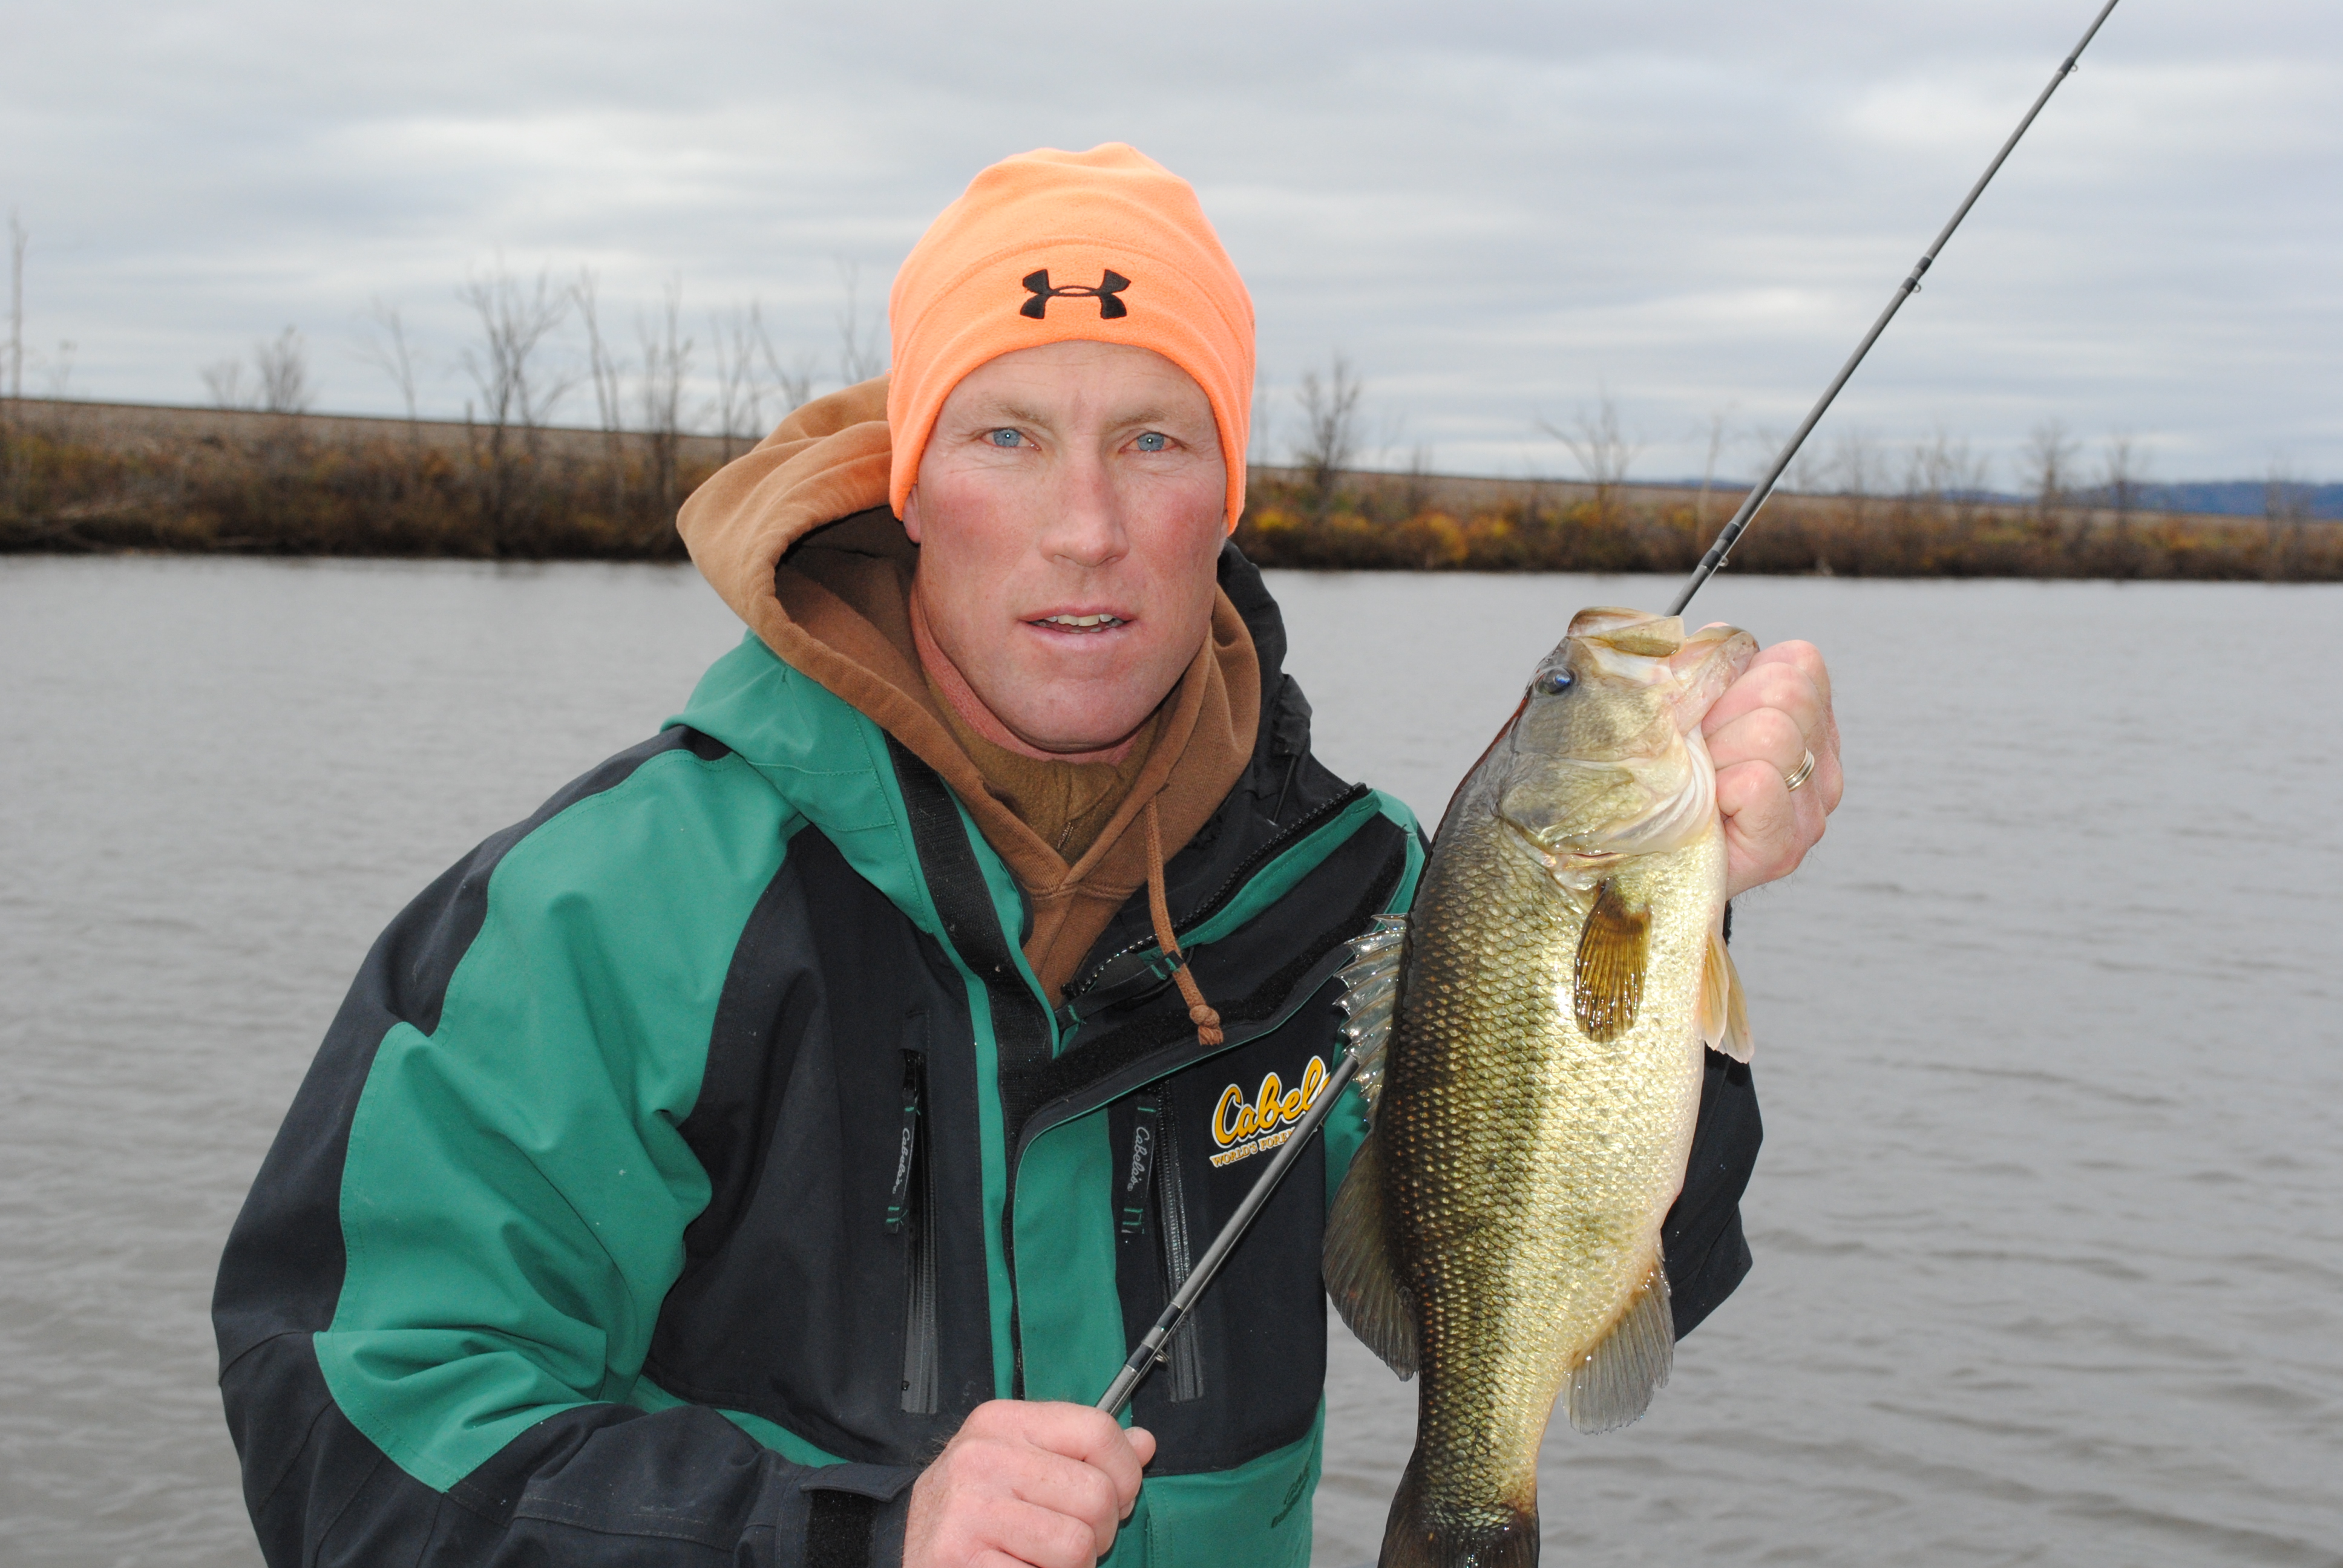 Terry Fitzpatrick with a big fall largemouth bass.